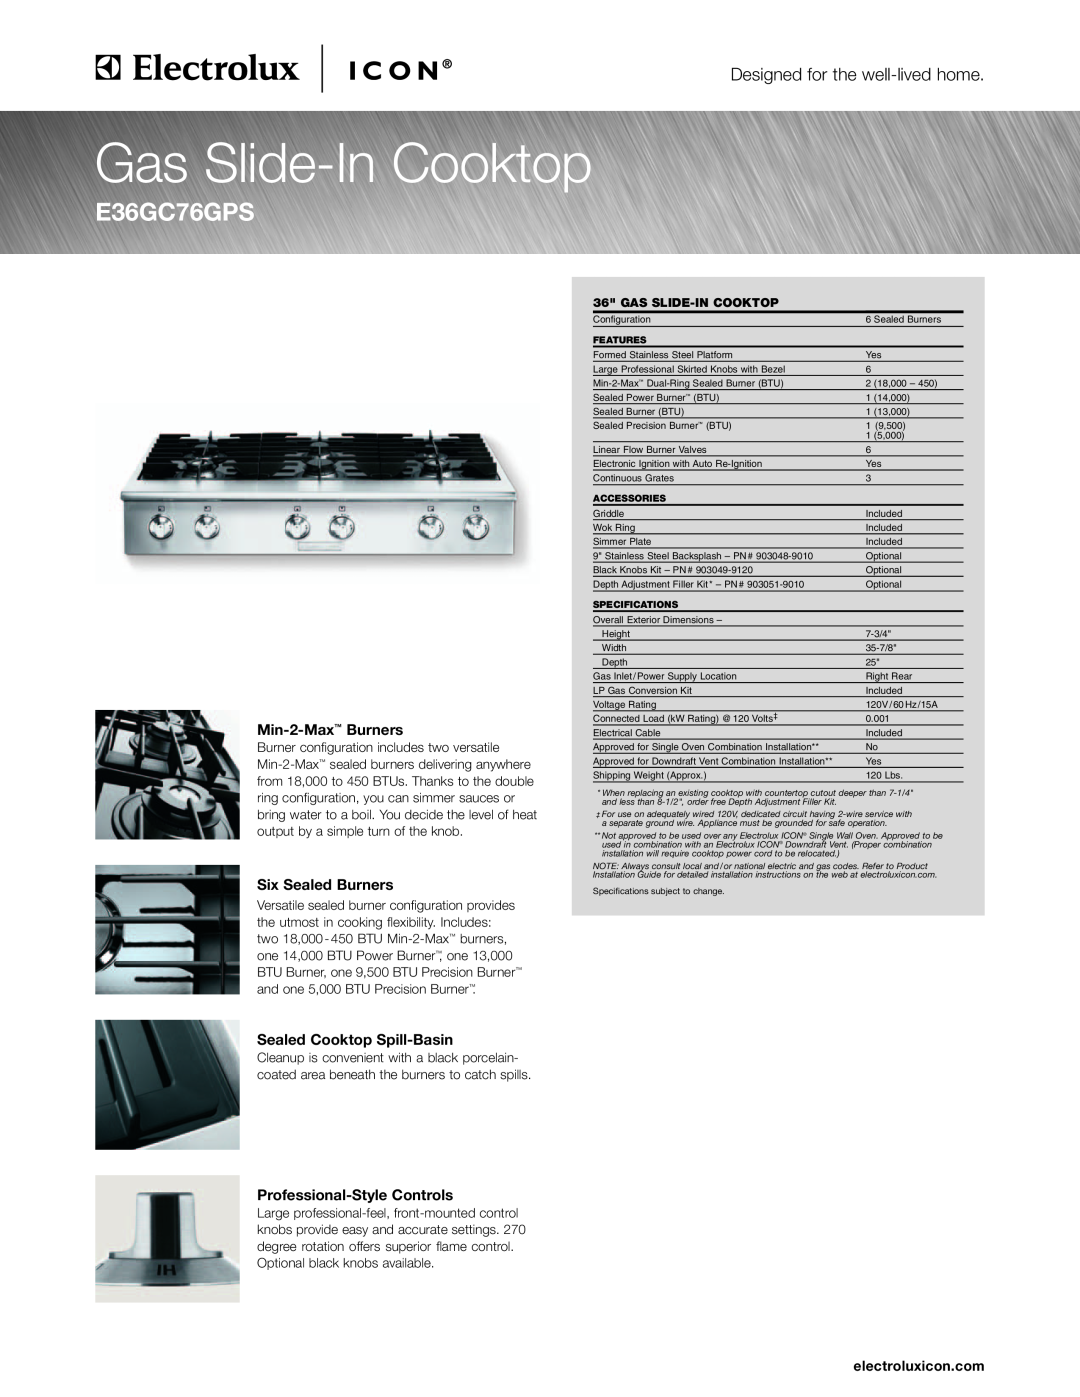 Electrolux E36EC75DSS specifications Min-2-Max Burners, Six Sealed Burners, Sealed Cooktop Spill-Basin, electroluxicon.com 